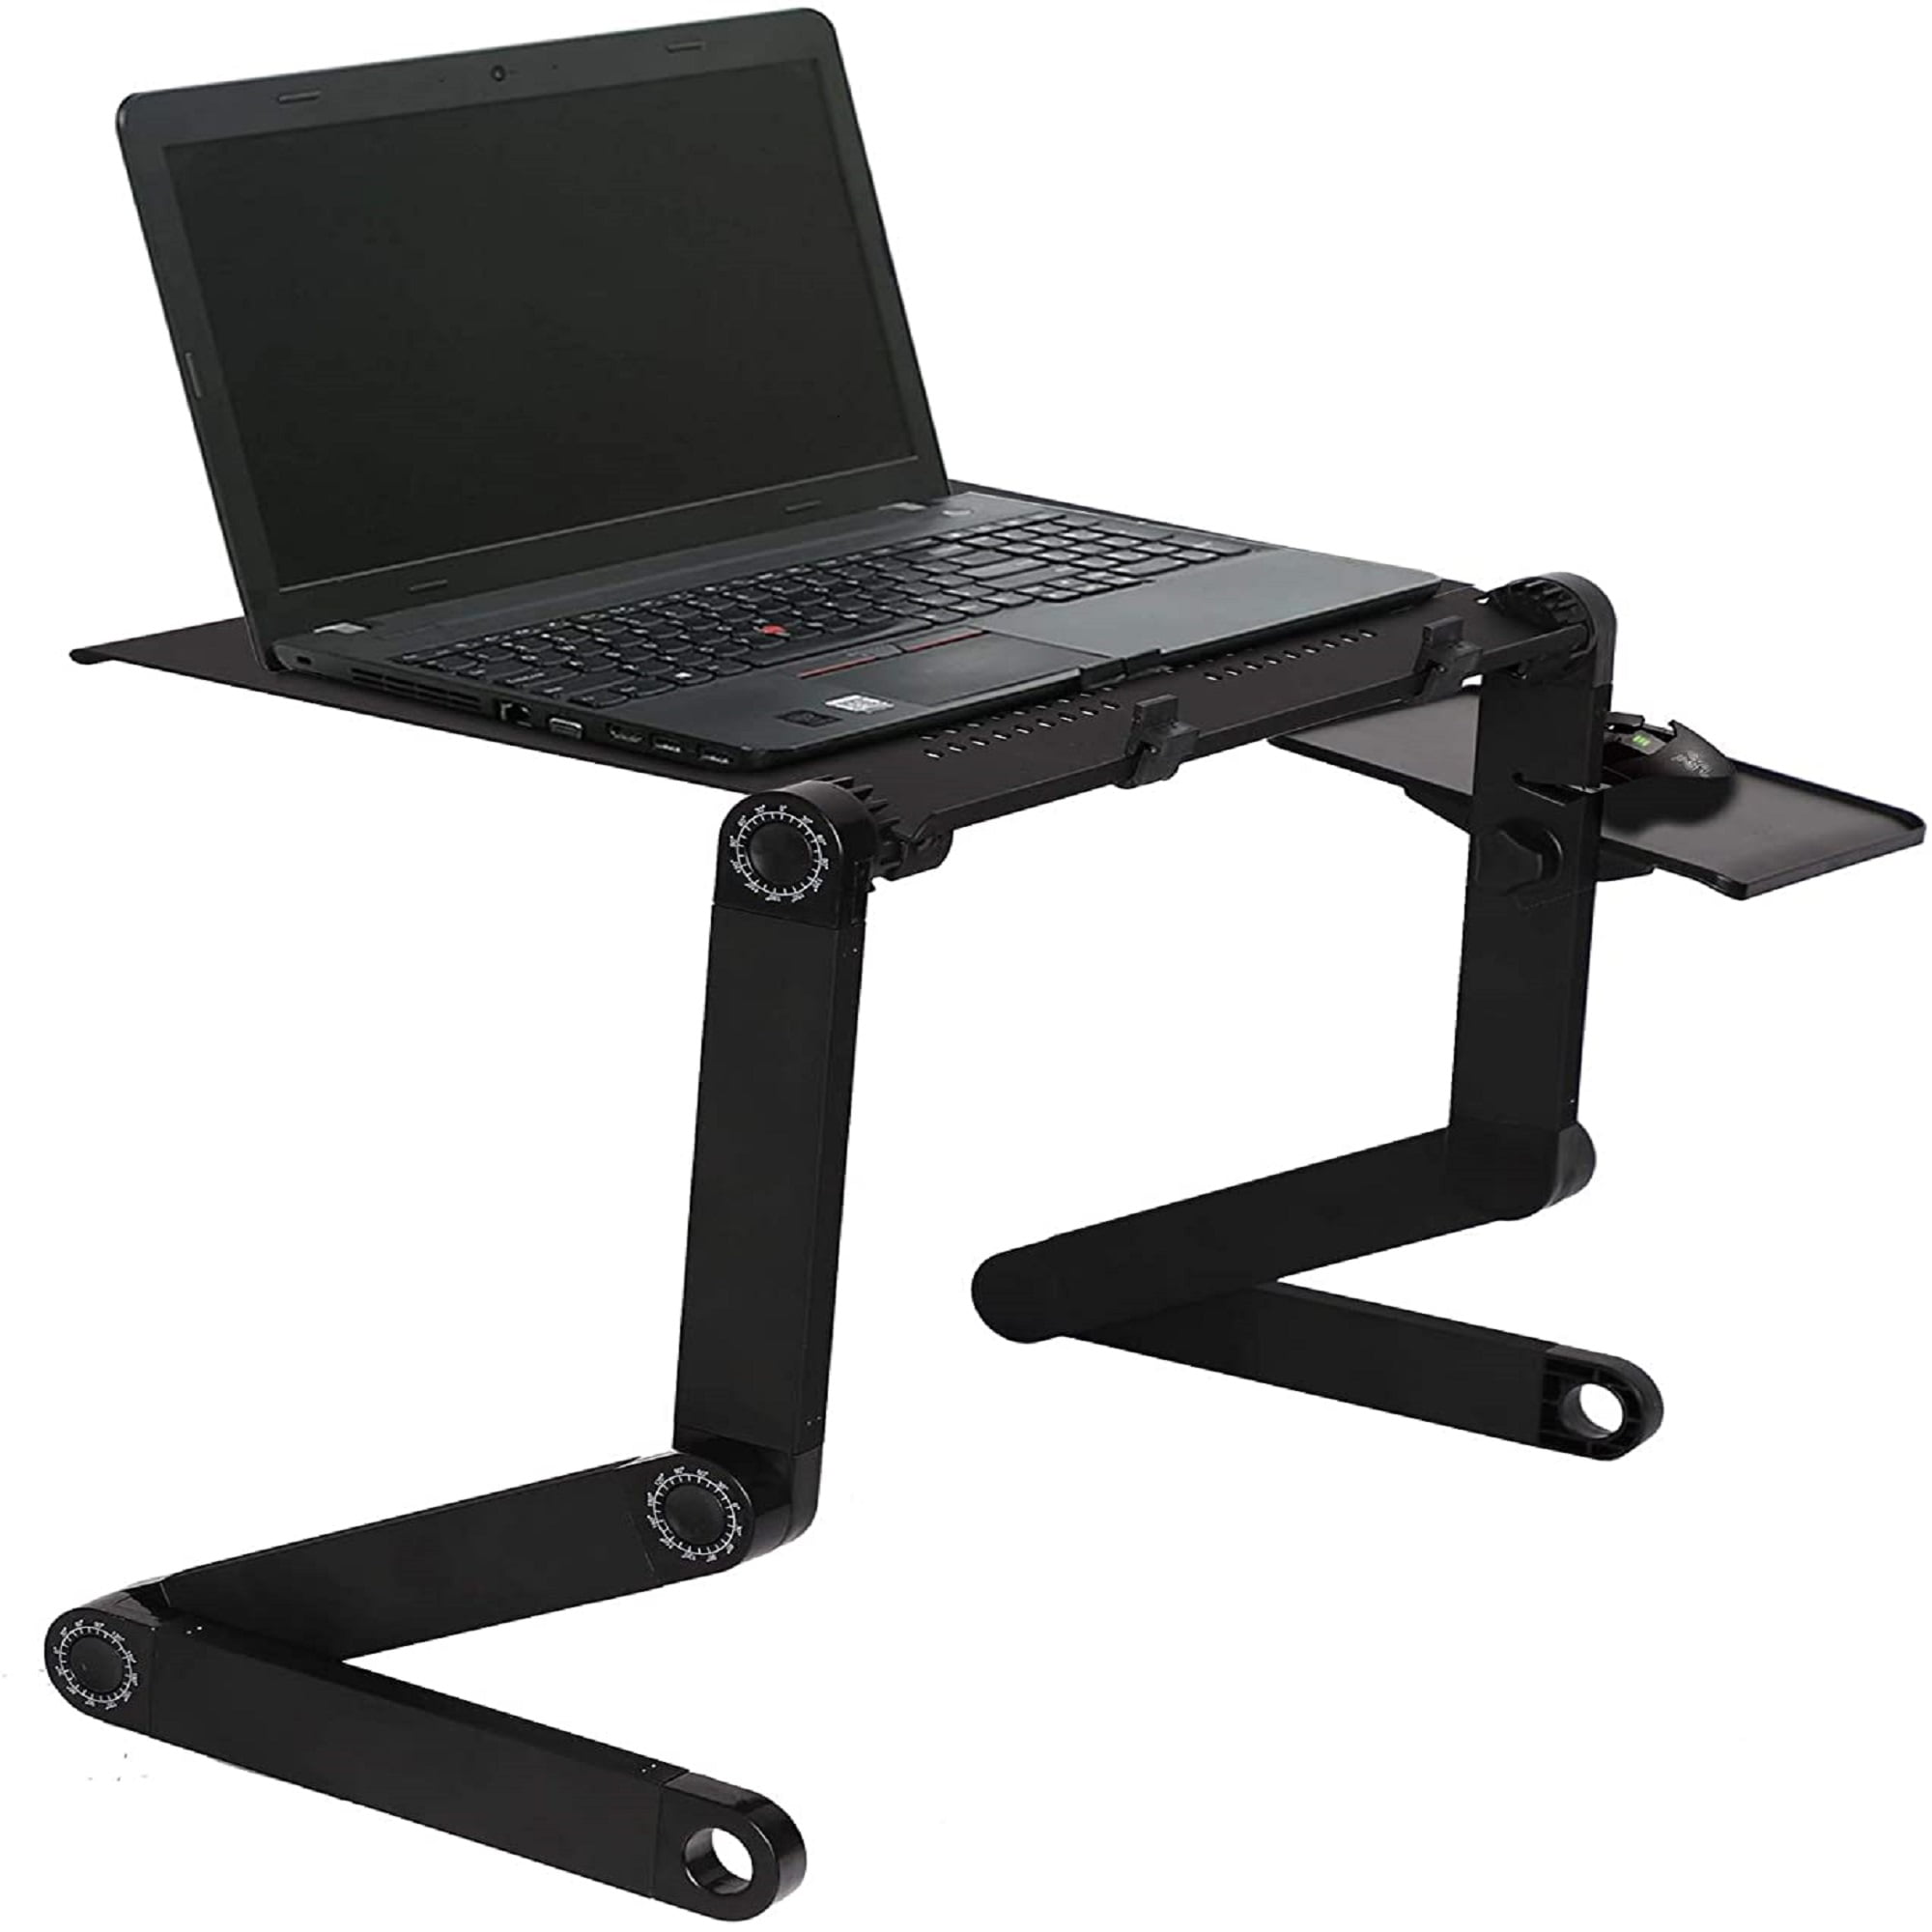 Computer Radiator Bracket Folding Laptop Table Lap Desk Computer Tray Stand Bracket with Radiator Cooling Fan Silver